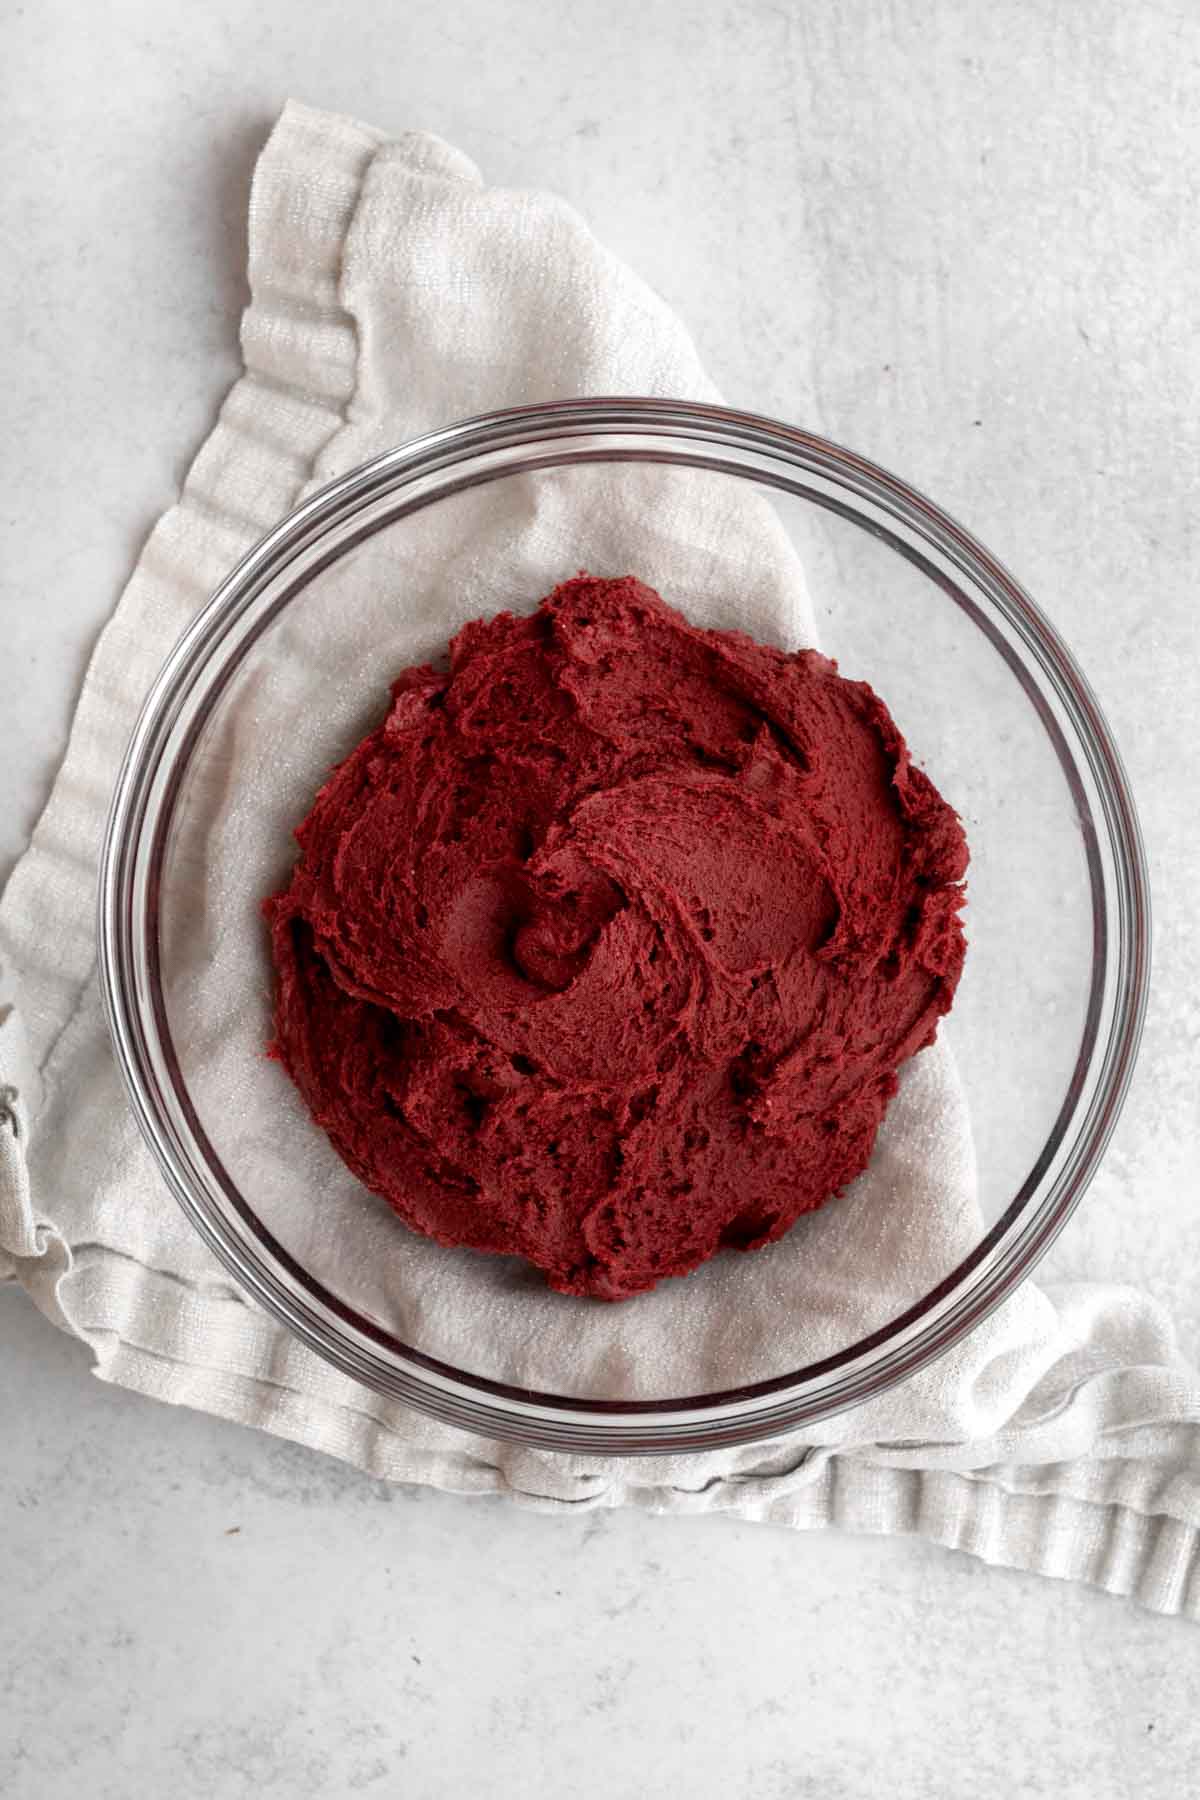 Mixing the wet and dry ingredients into a red velvet cookie dough.